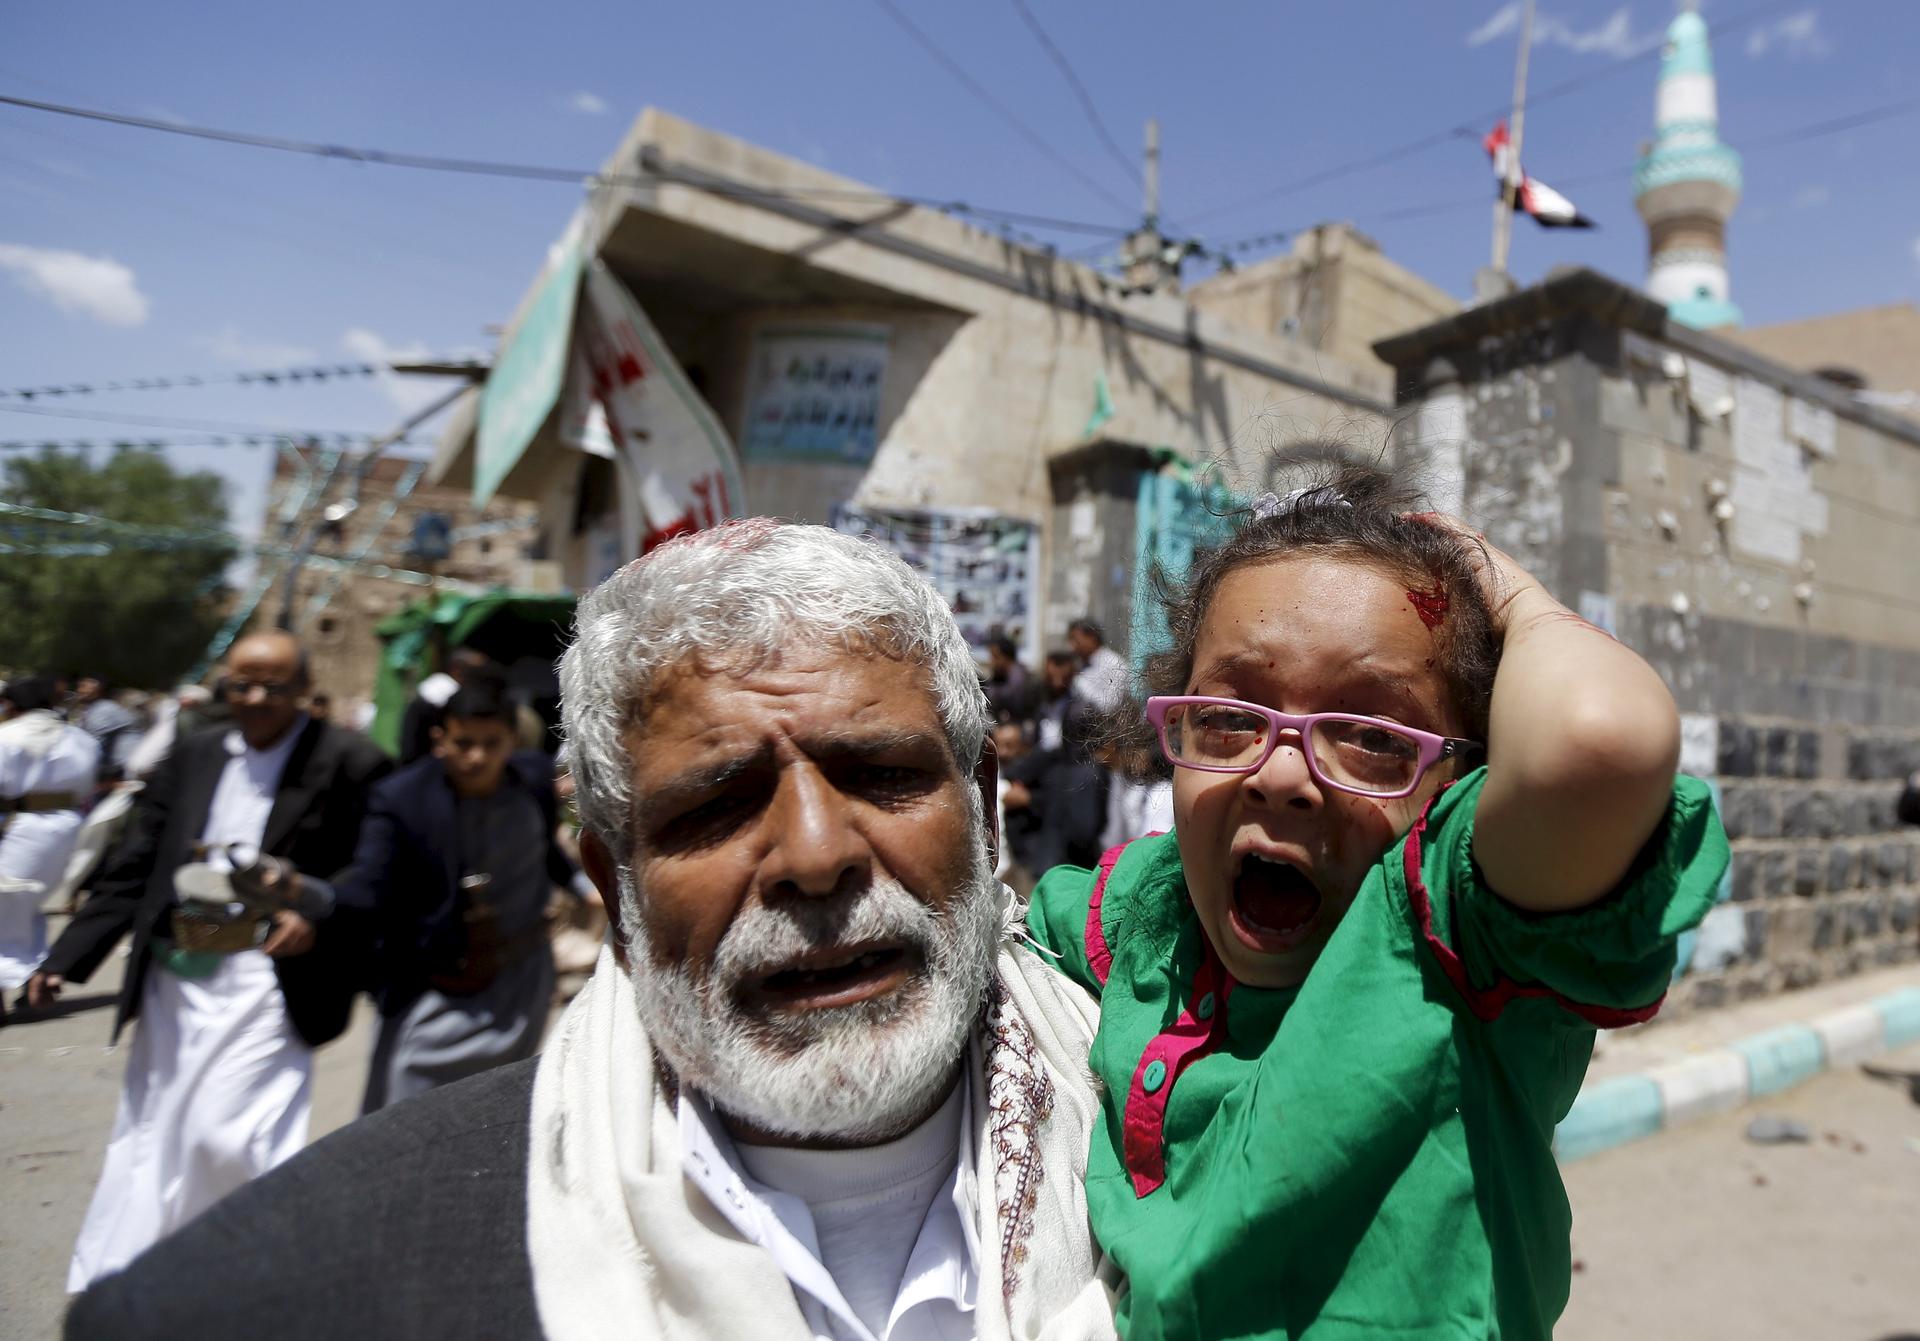 An injured girl reacts as she is carried by a man out of a mosque which was attacked by a suicide bomber in Sanaa on March 20, 2015.